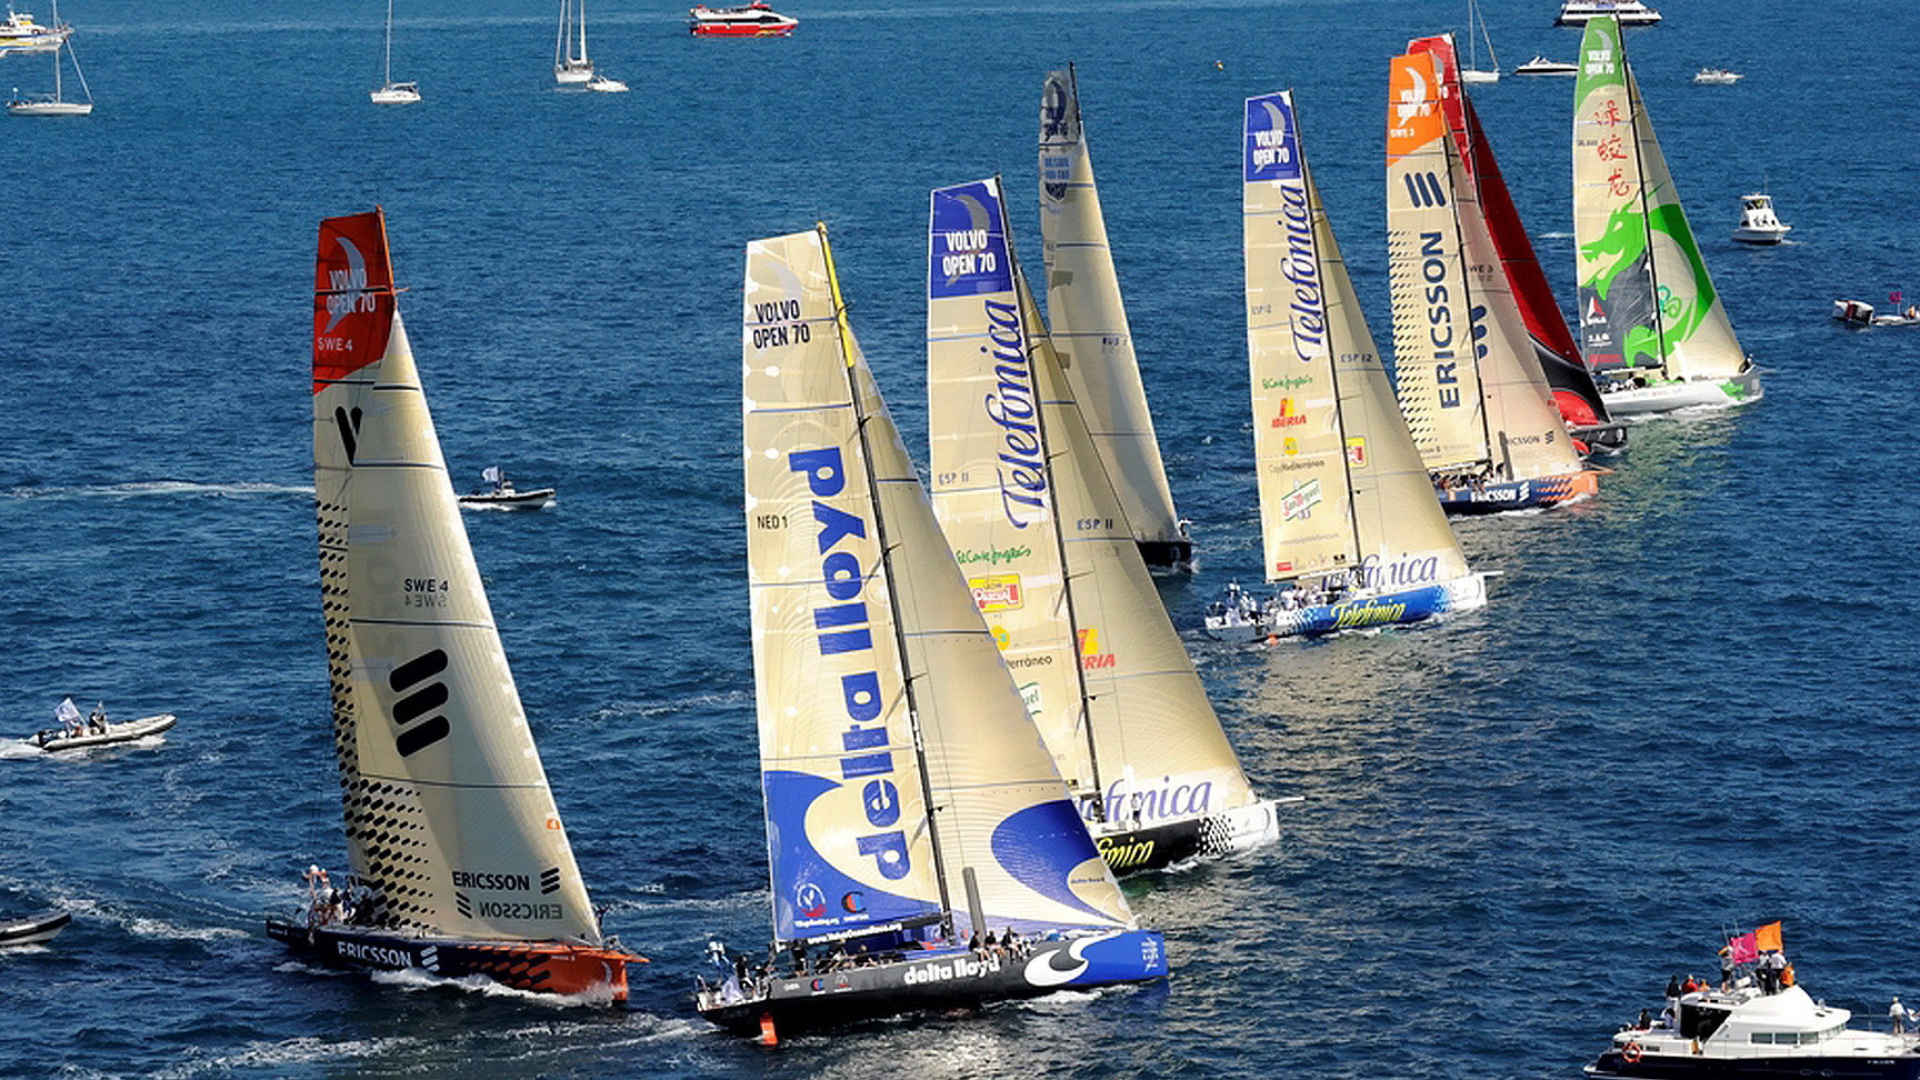 Yacht Racing: A competition between crews of people in sailboats, Sail, Regatta, Windsports. 1920x1080 Full HD Wallpaper.